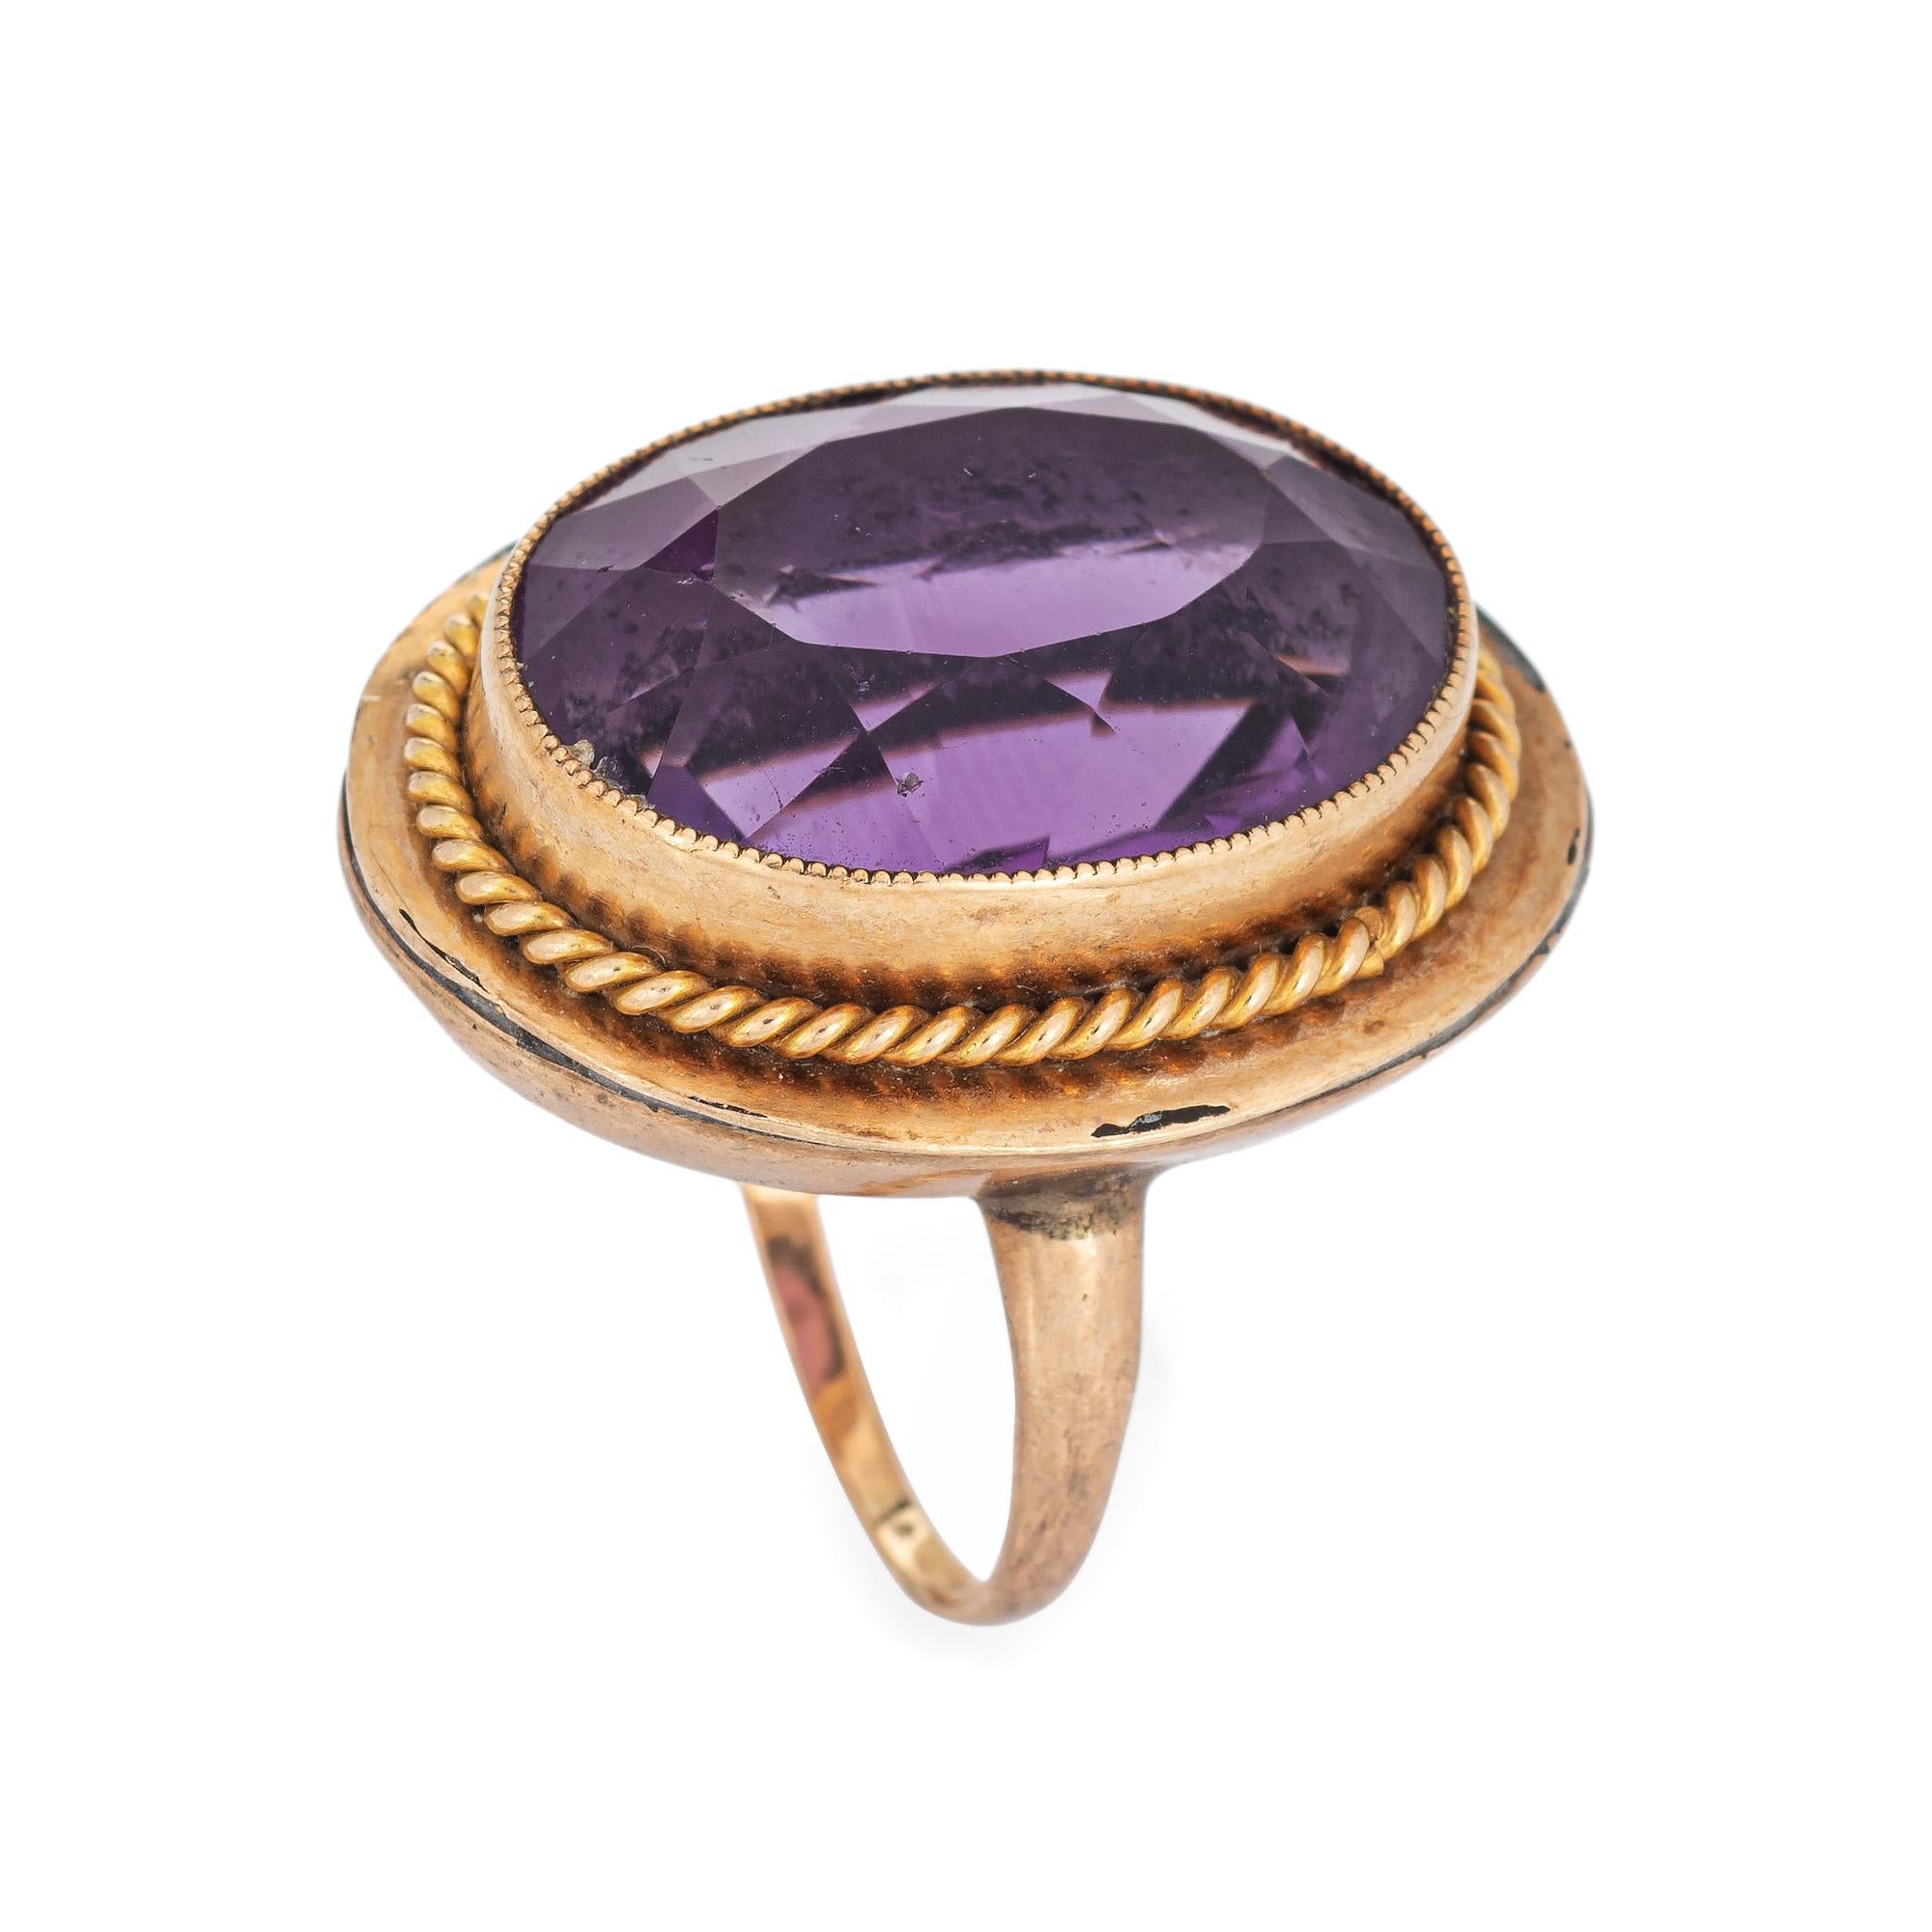 Stylish vintage amethyst cocktail ring (circa 1920s to 1930s) crafted in 10k & 14k karat yellow gold. 

Faceted oval cut amethyst measures 18mm x 13mm (estimated at 12 carats). The amethyst is in good condition with a few light surface abrasions